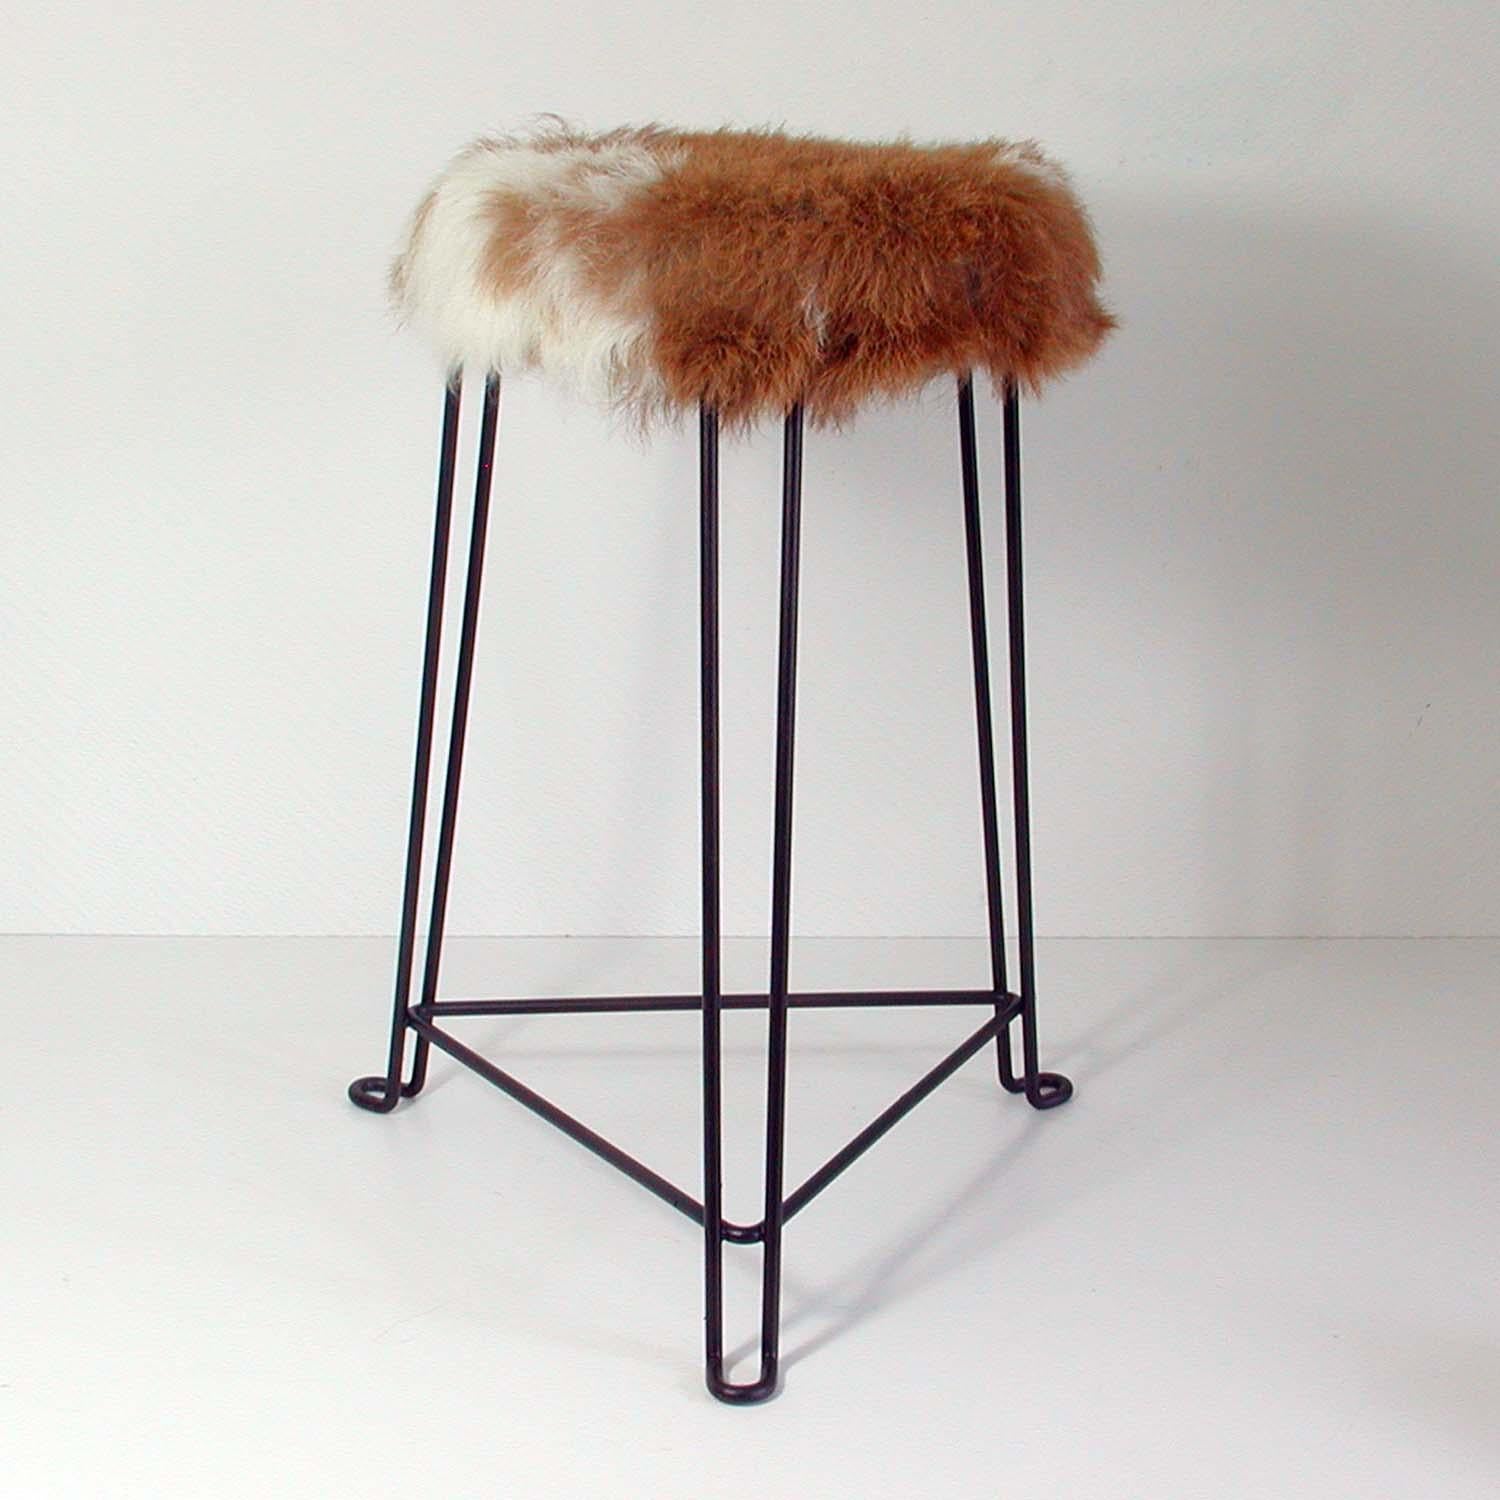 This industrial inspired stool was manufactured by Tomado in the Netherlands in the 1950s and designed by Jan Van Der Togt.

The stool is made of black lacquered tubular steel and has got a real goatskin seat in creme and toffee. The stool has